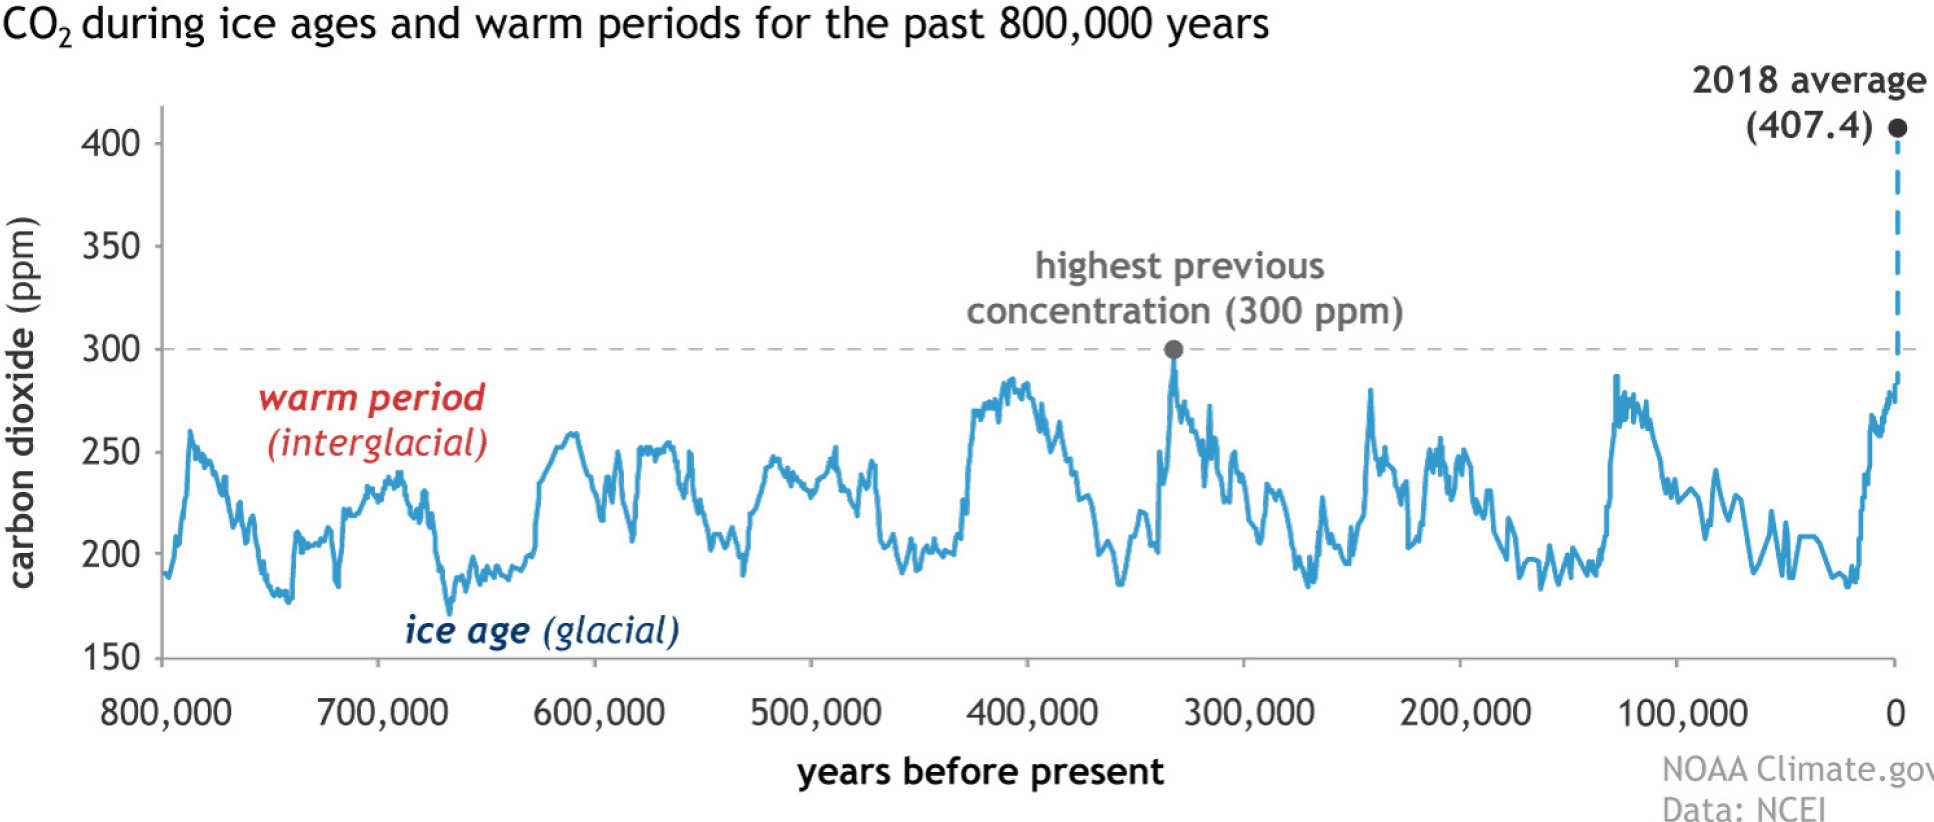 A graph showing increases in atmospheric CO2 concentrations throughout the last 800,000 years. It shows that CO2 levels are higher now than at any point in this time period.